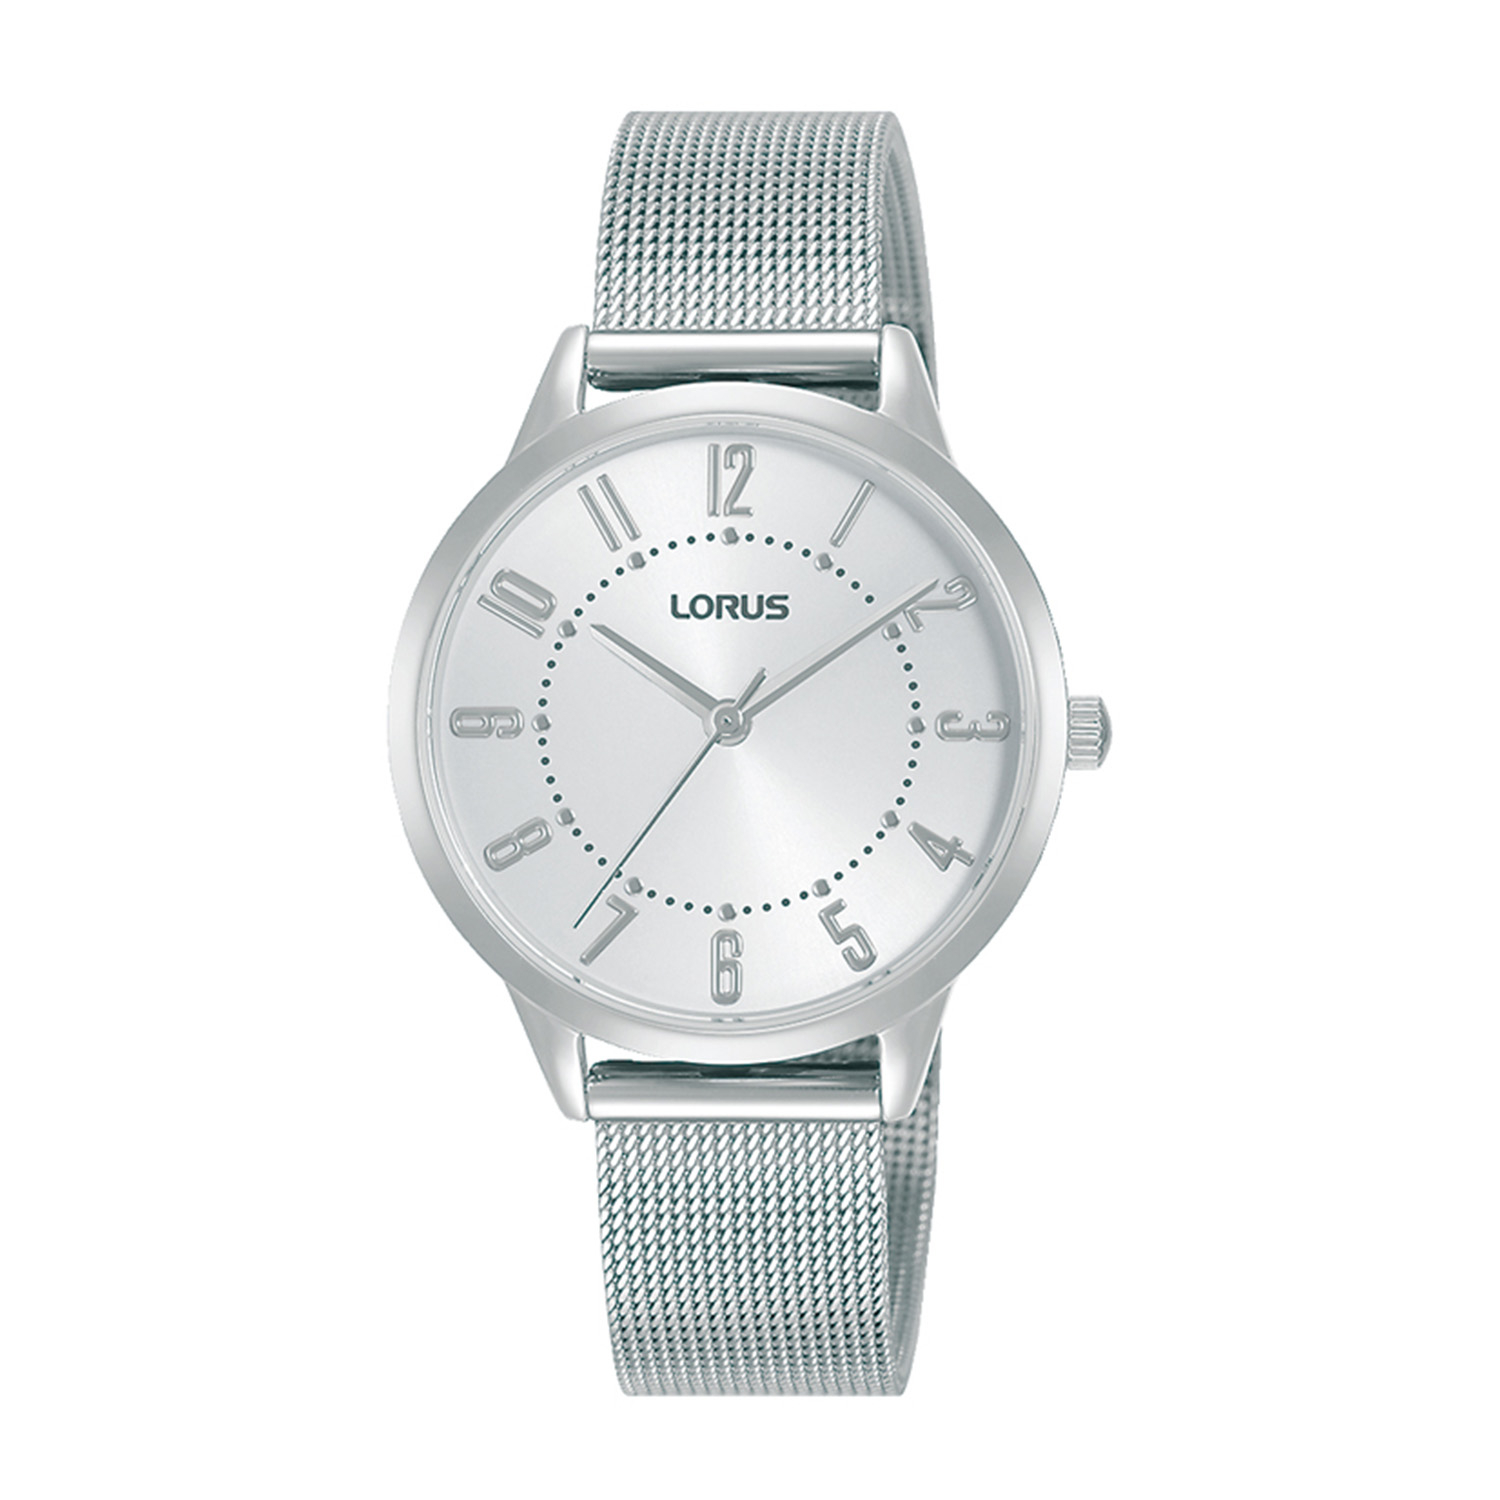 Womens watch LORUS made of silver stainless steel with white dial and bracelet.